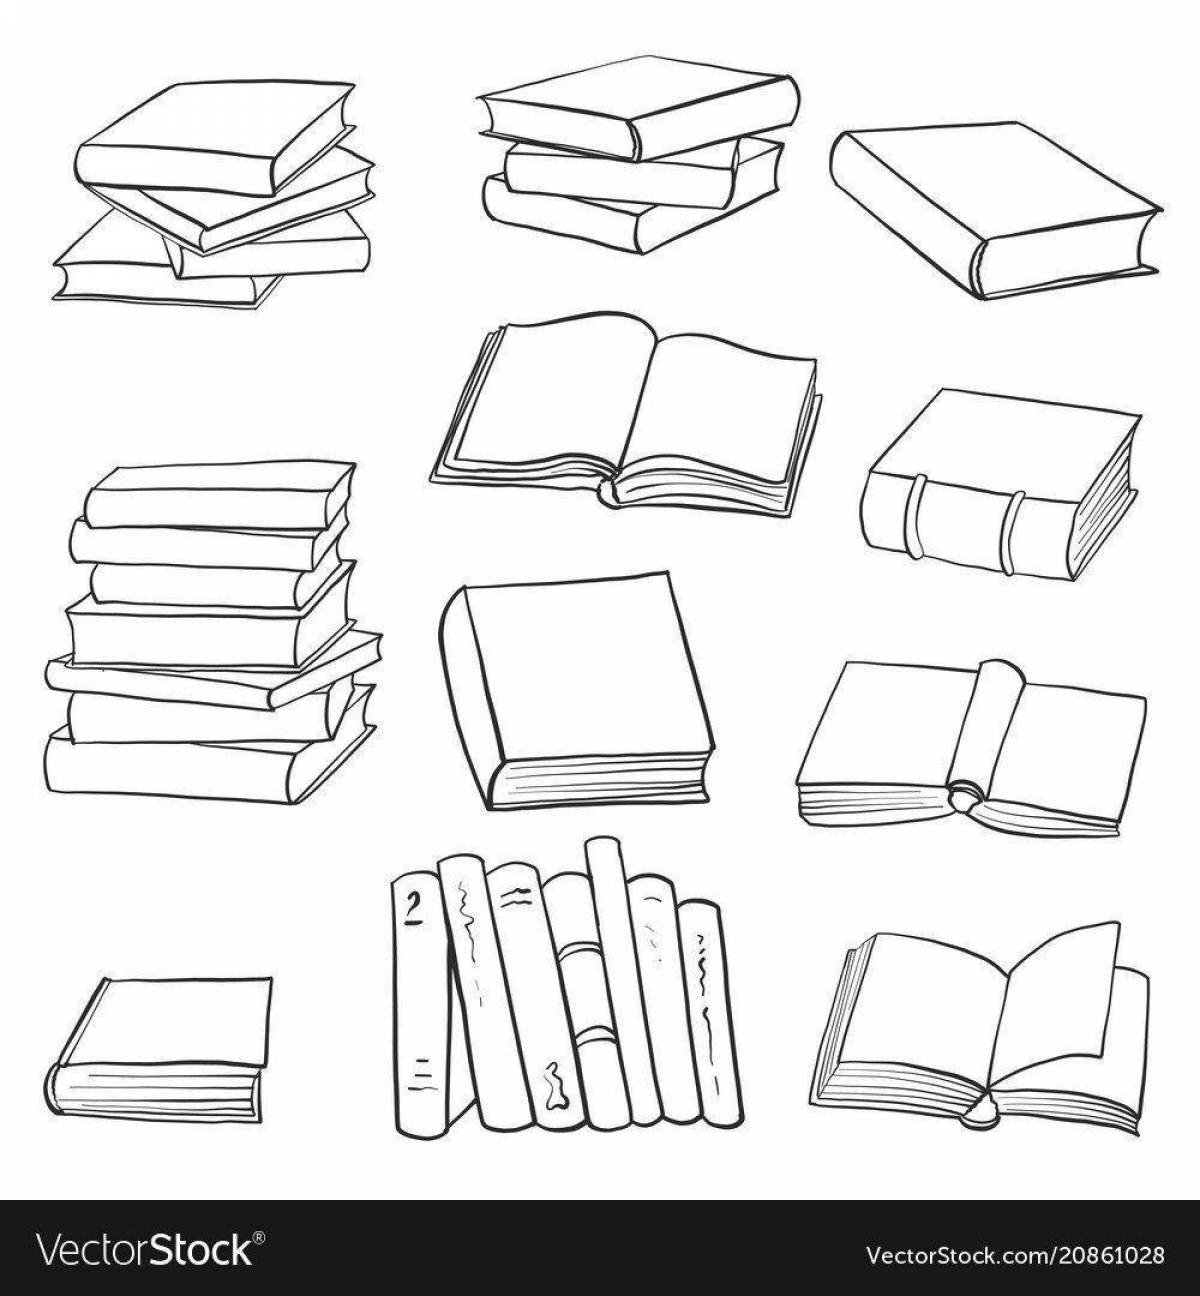 Playful stack of books coloring page